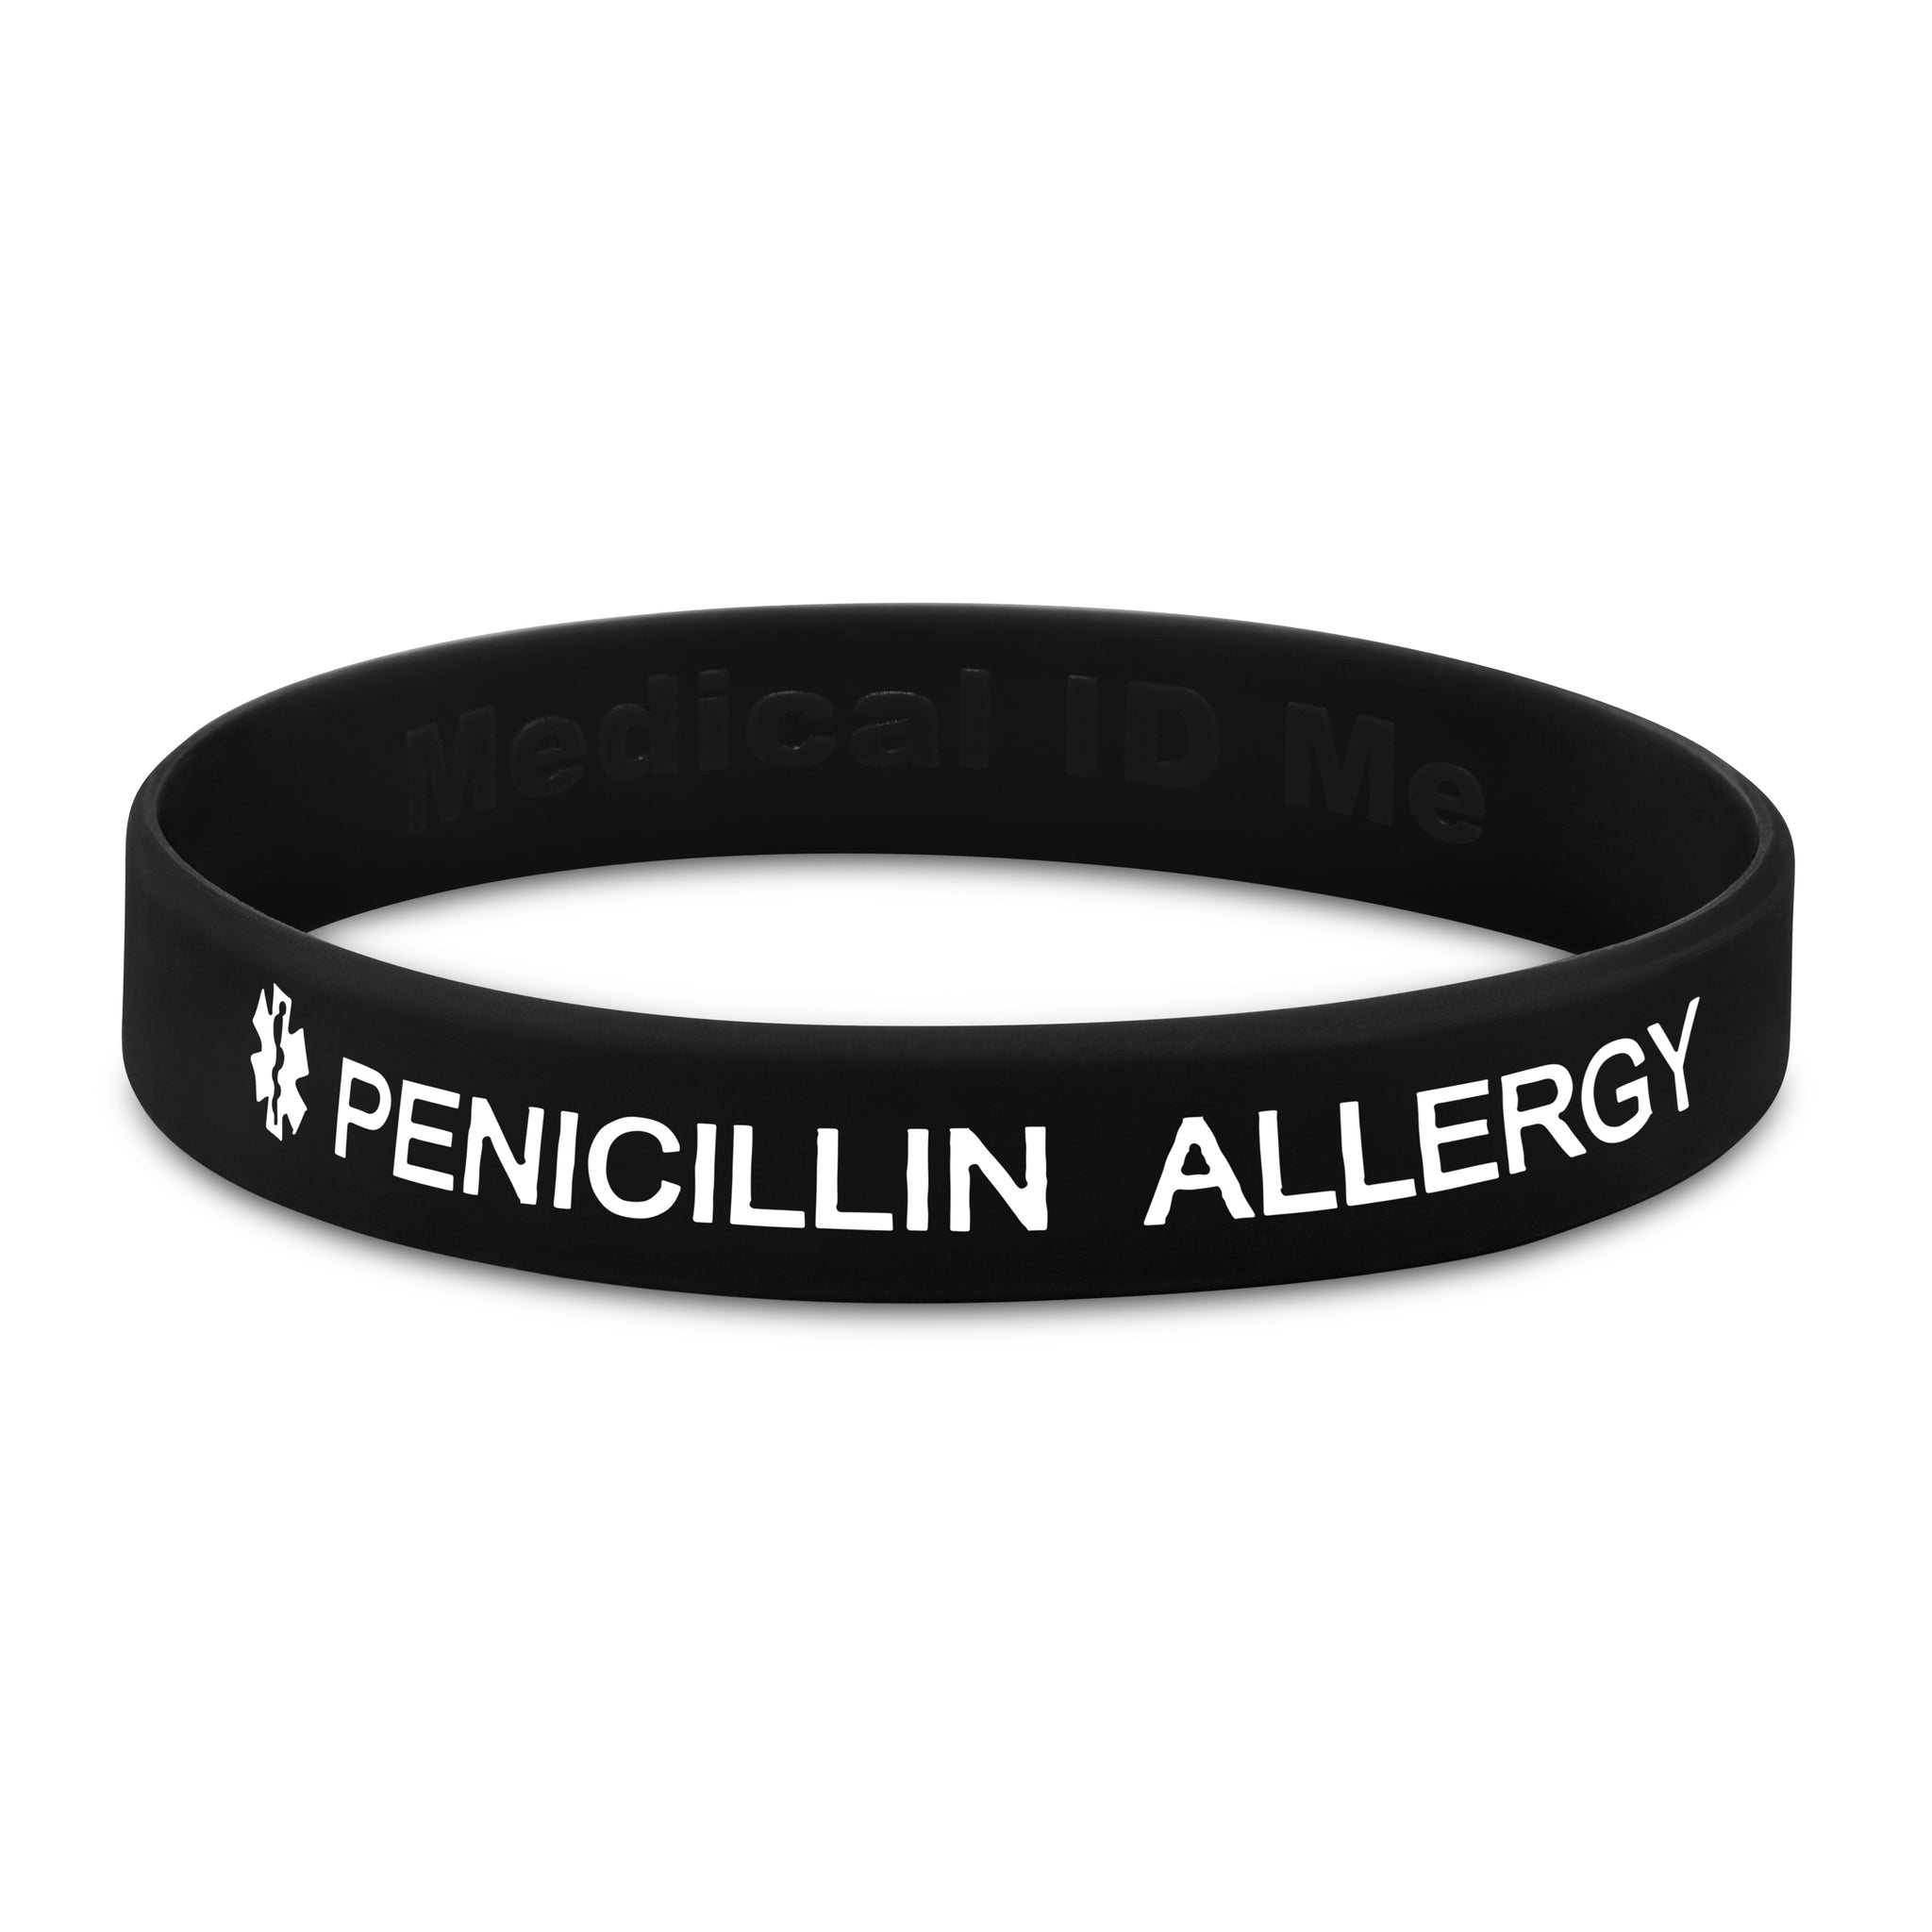 The Ultimate Guide to Medical Alert Jewelry - FoodAllergy.org